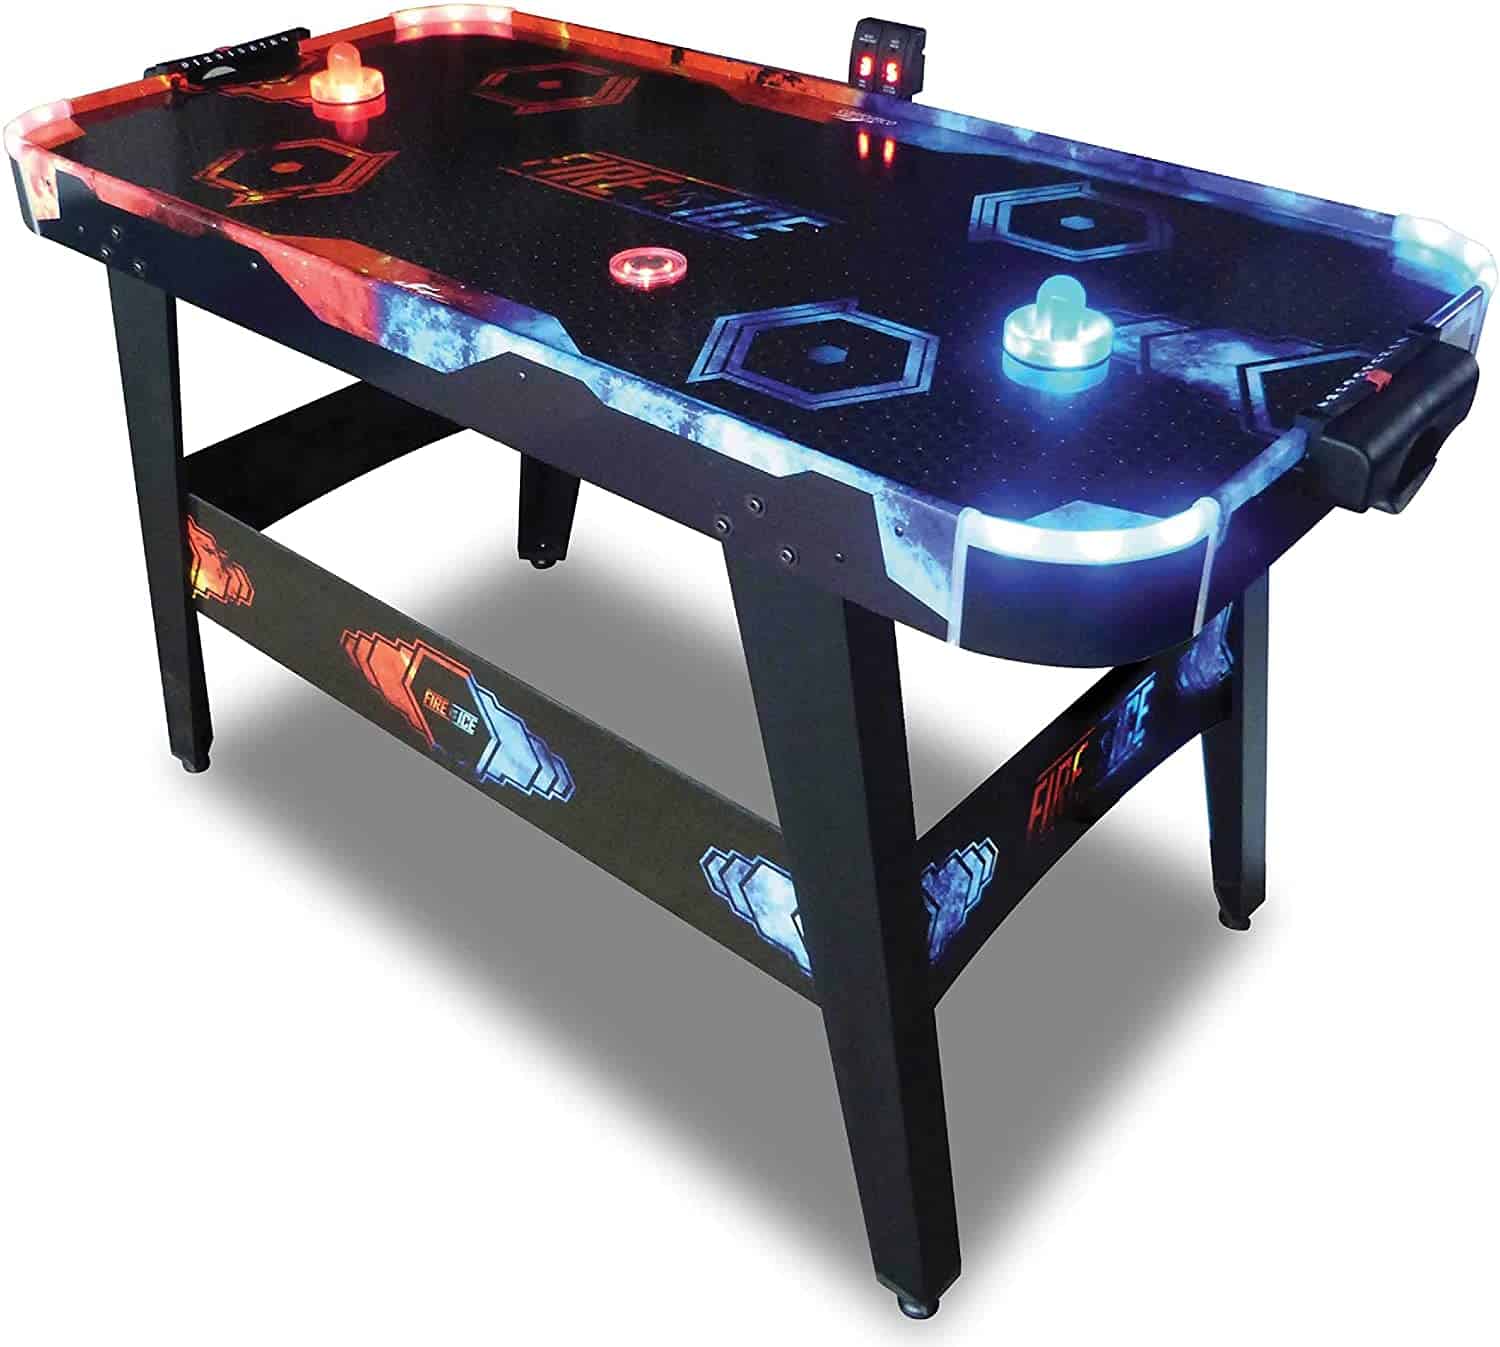 Best air hockey table with lights: Triumph Carromco Fire & Ice